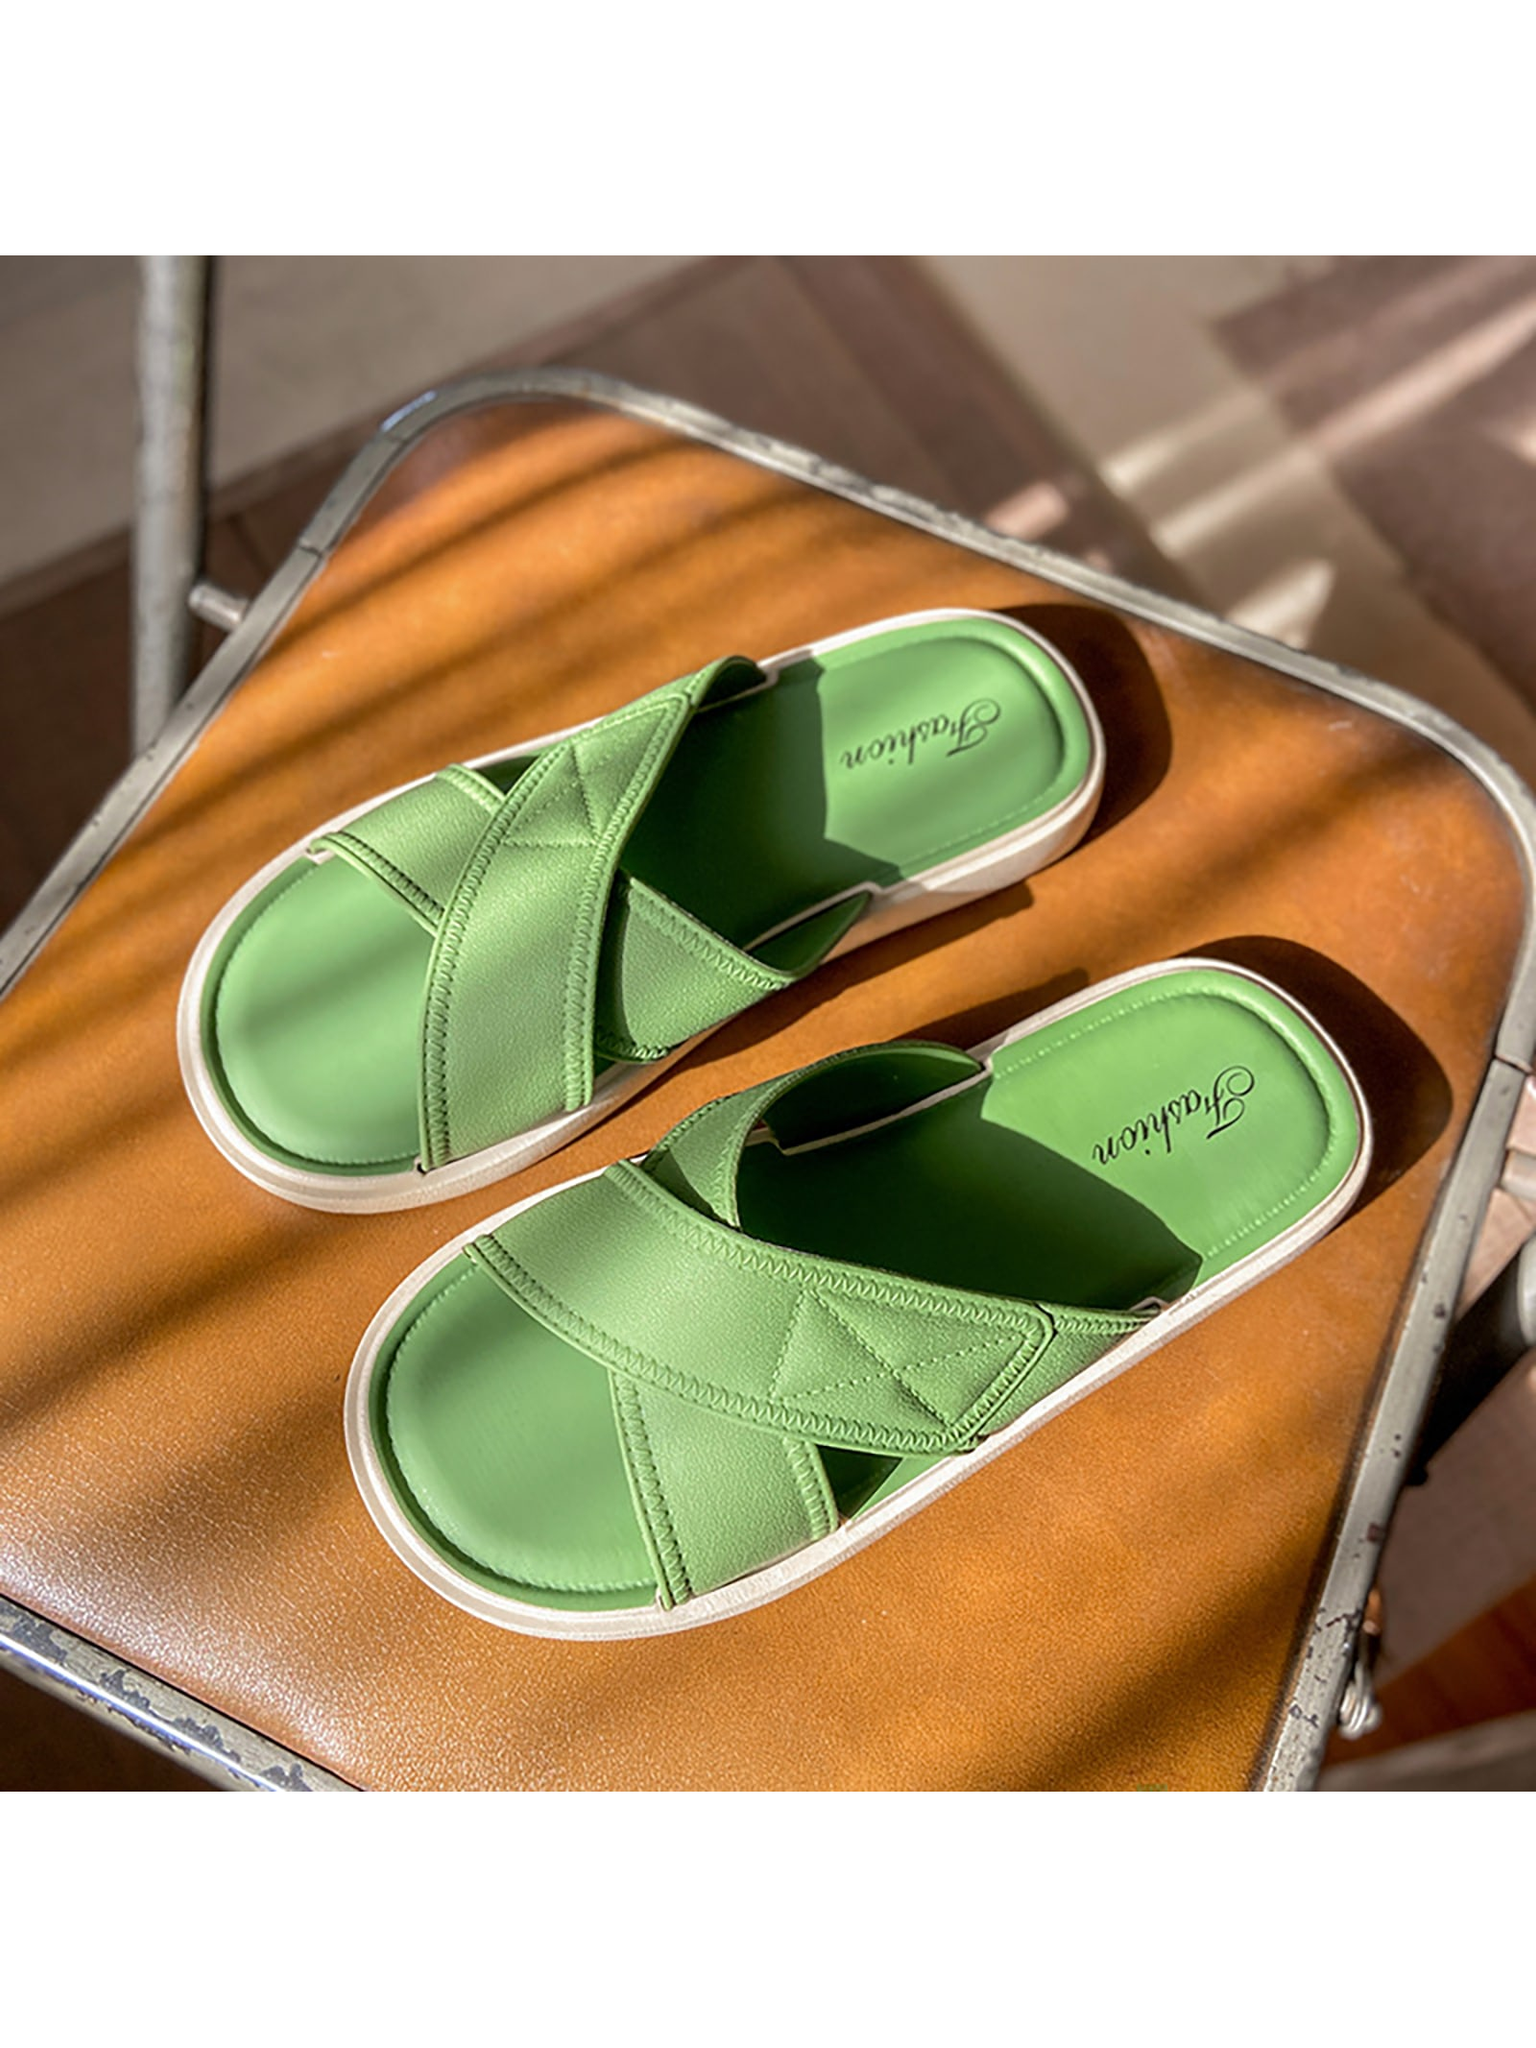 New Arrival Simple, Elegant And Versatile Slippers With Soft Pvc Outsole For Anti-Slip On The Beach And In Home Bathroom - Suitable For Indoor And Outdoor Wear, Giving You A Chic And Fresh Ins Look-Green-3